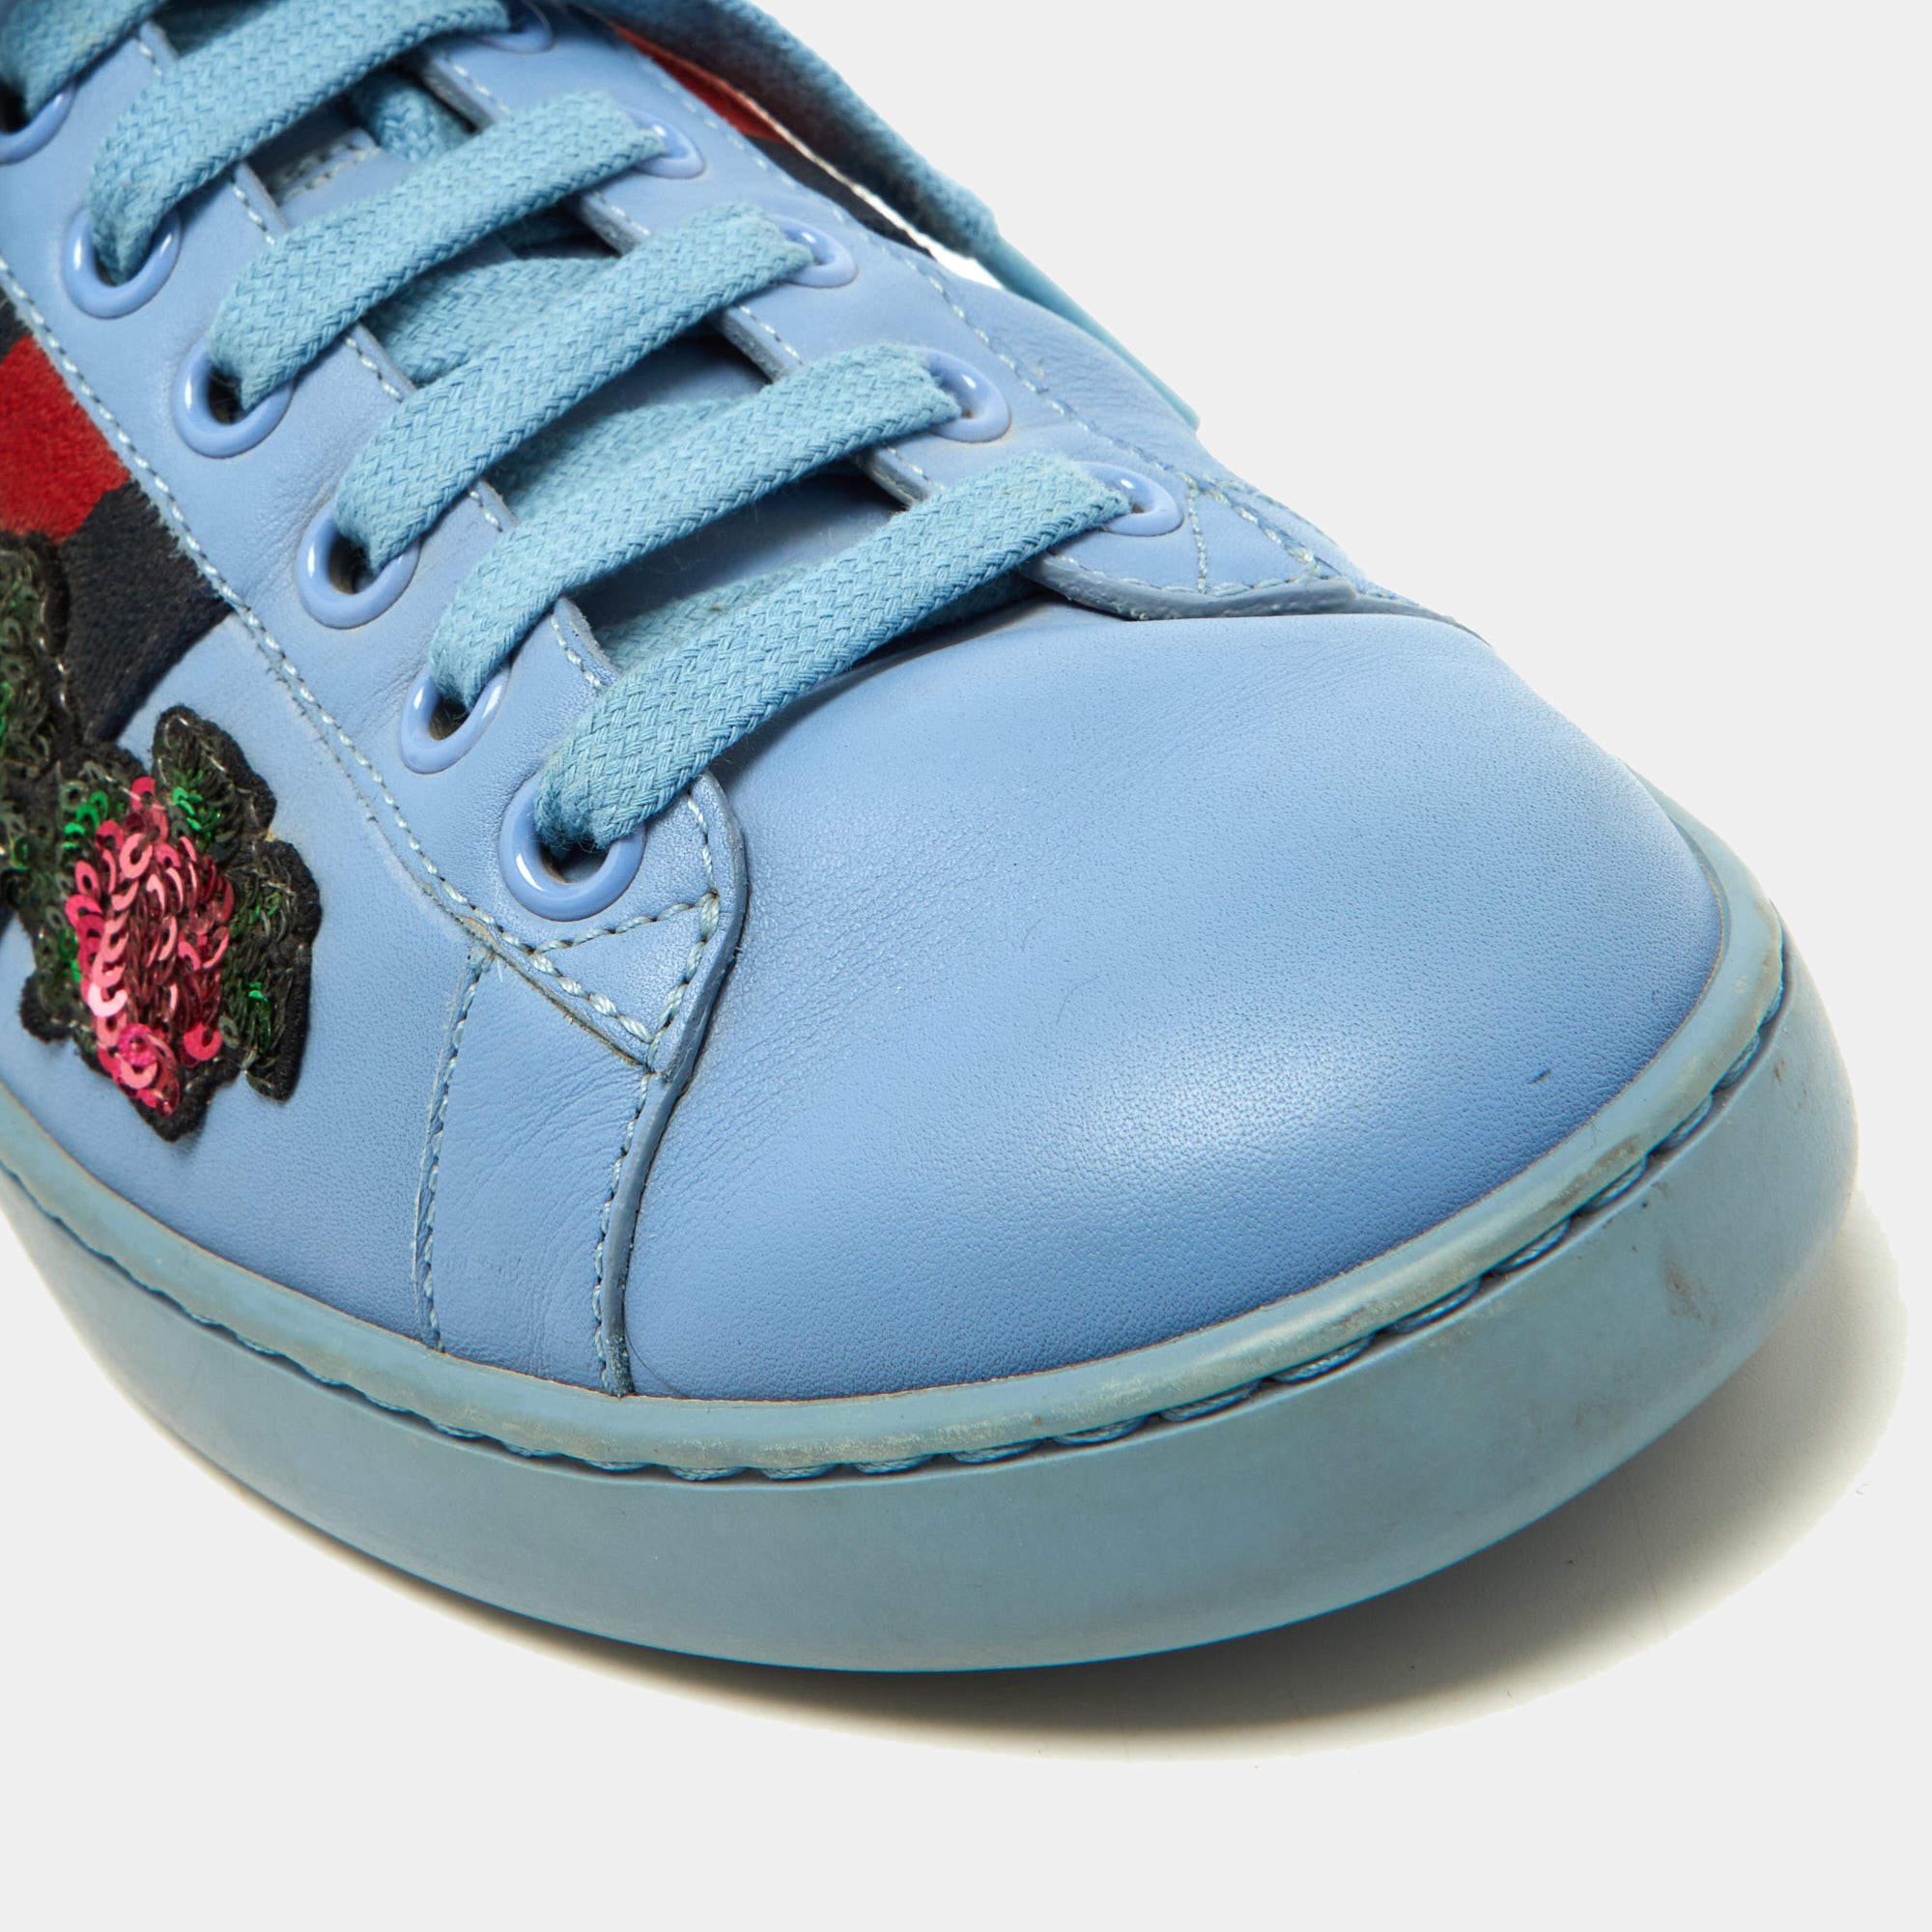 Gucci Blue Leather Flower Sequins Embellished Ace Low Top Sneakers Size 36 For Sale 2